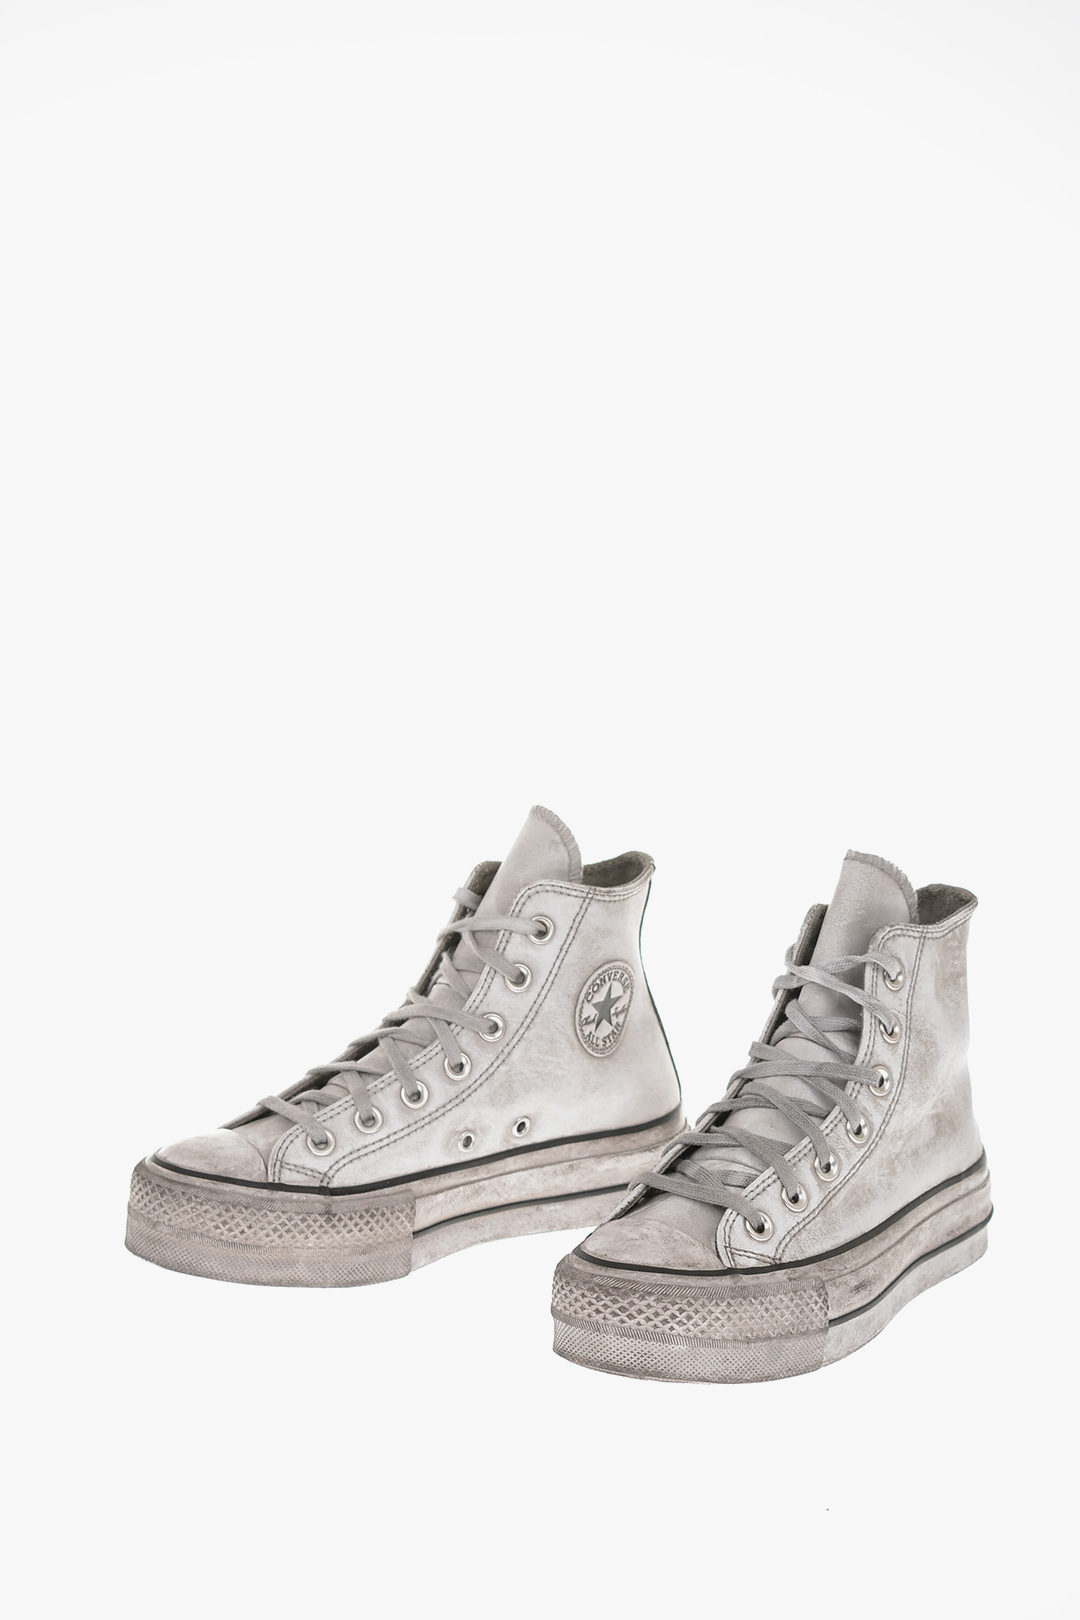 Converse CHUCK TAYLOR ALL STAR leather Vintage Effect High-top Sneakers  women - Glamood Outlet